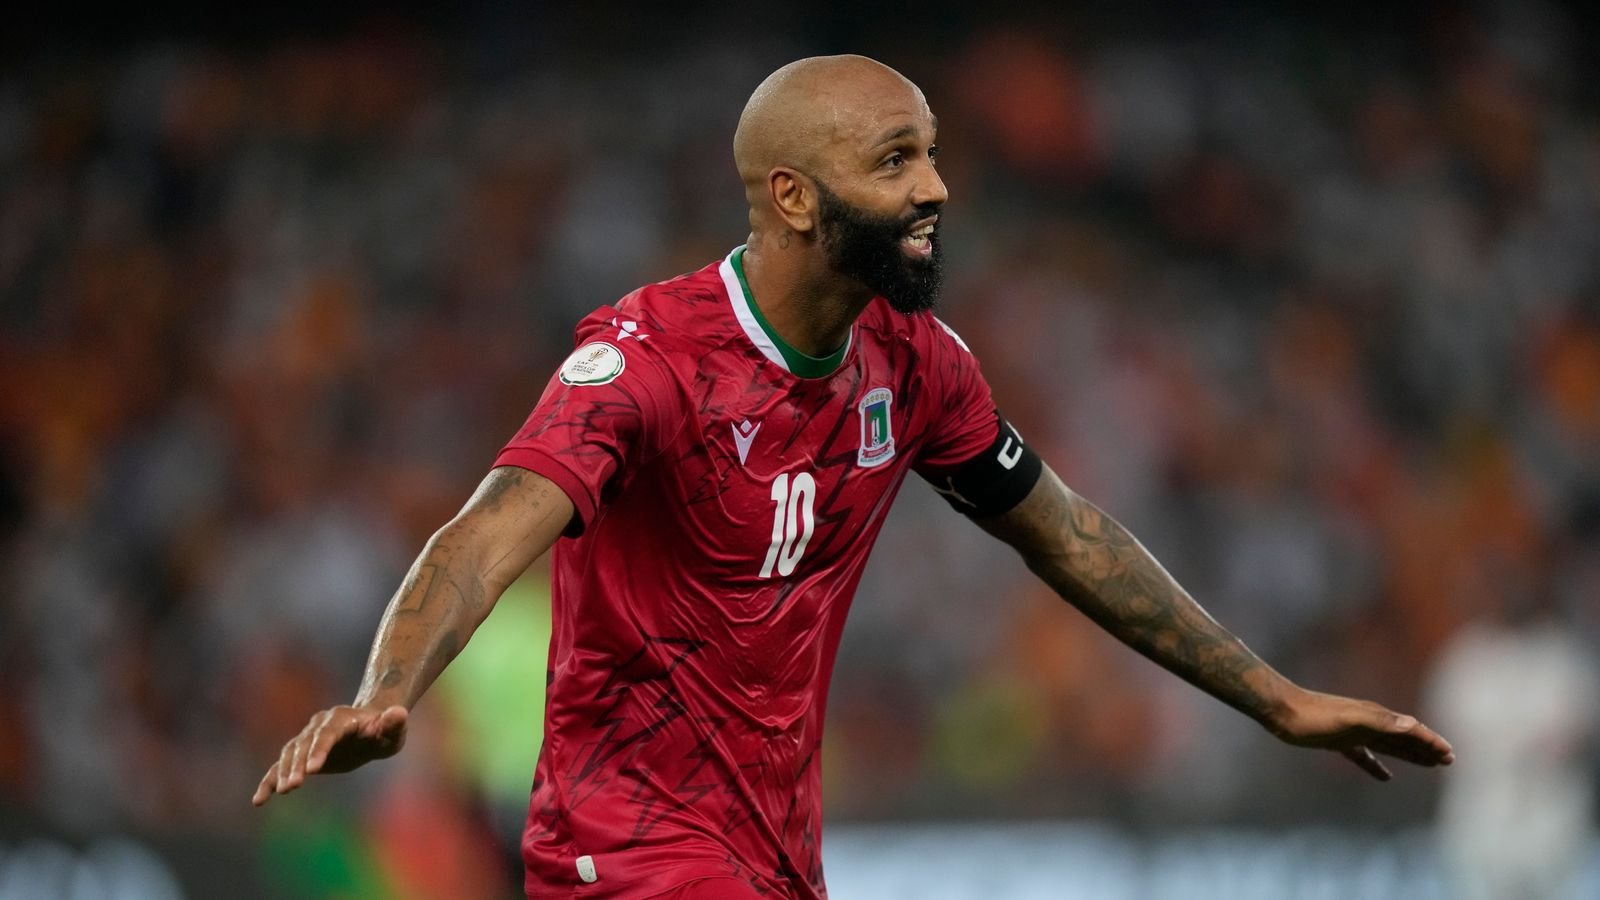 AFCON 2023: Ivory Coast’s hopes hanging by thread after Equatorial Guinea rout as Egypt scrape through | Football News